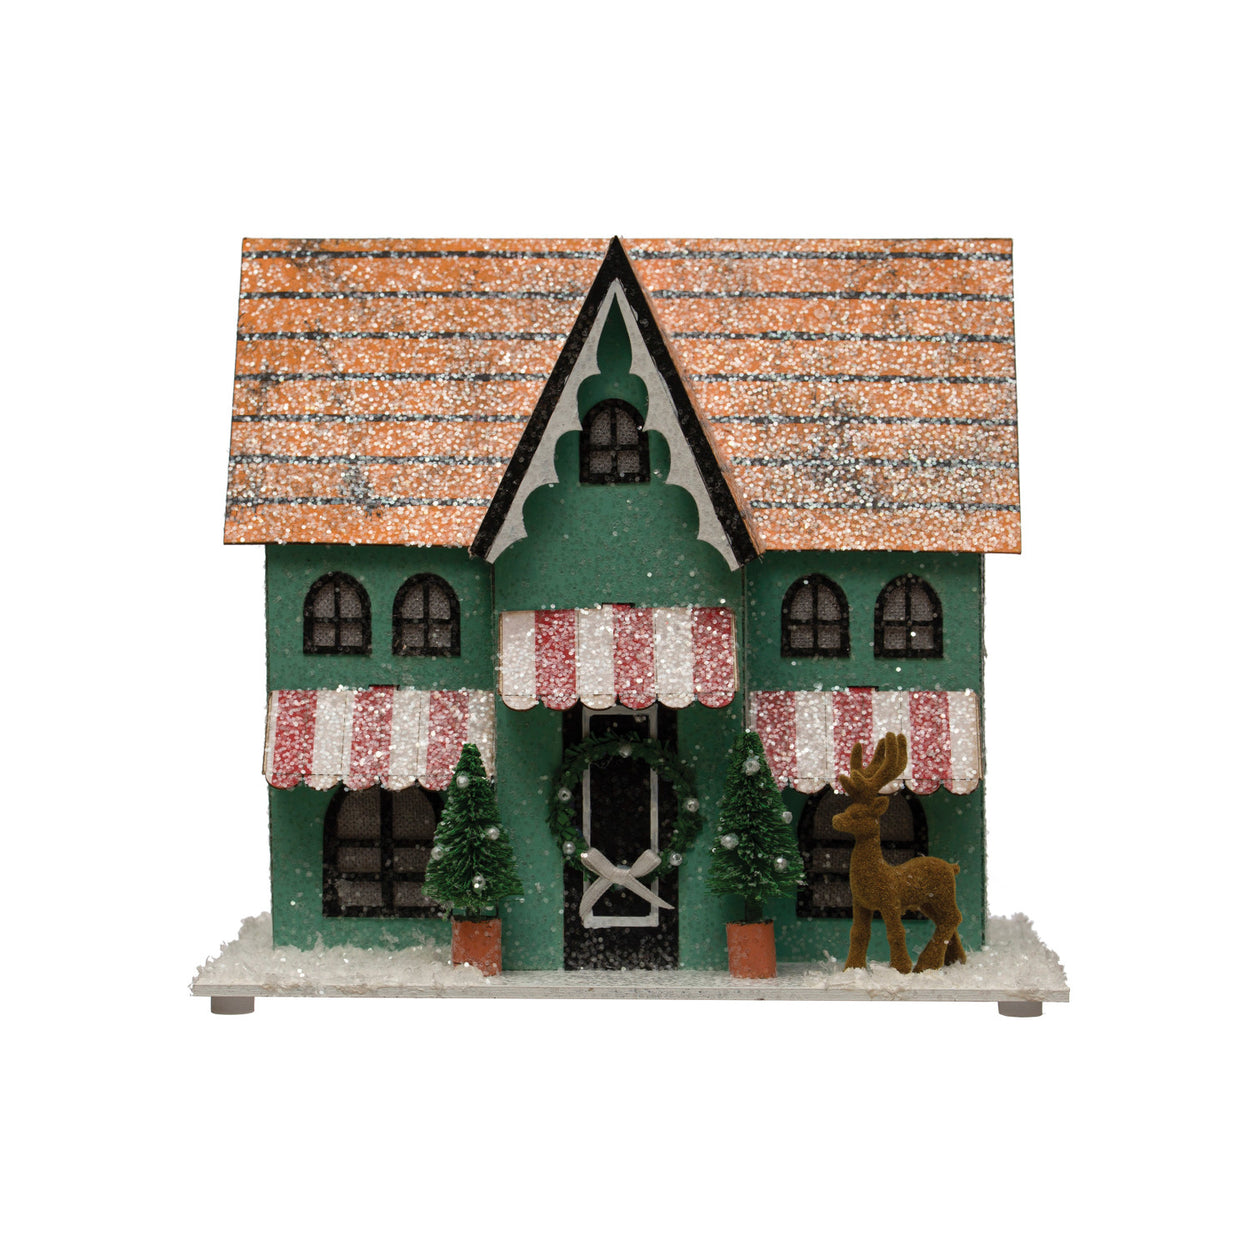 Green Glittered Paper House With Trees & Deer